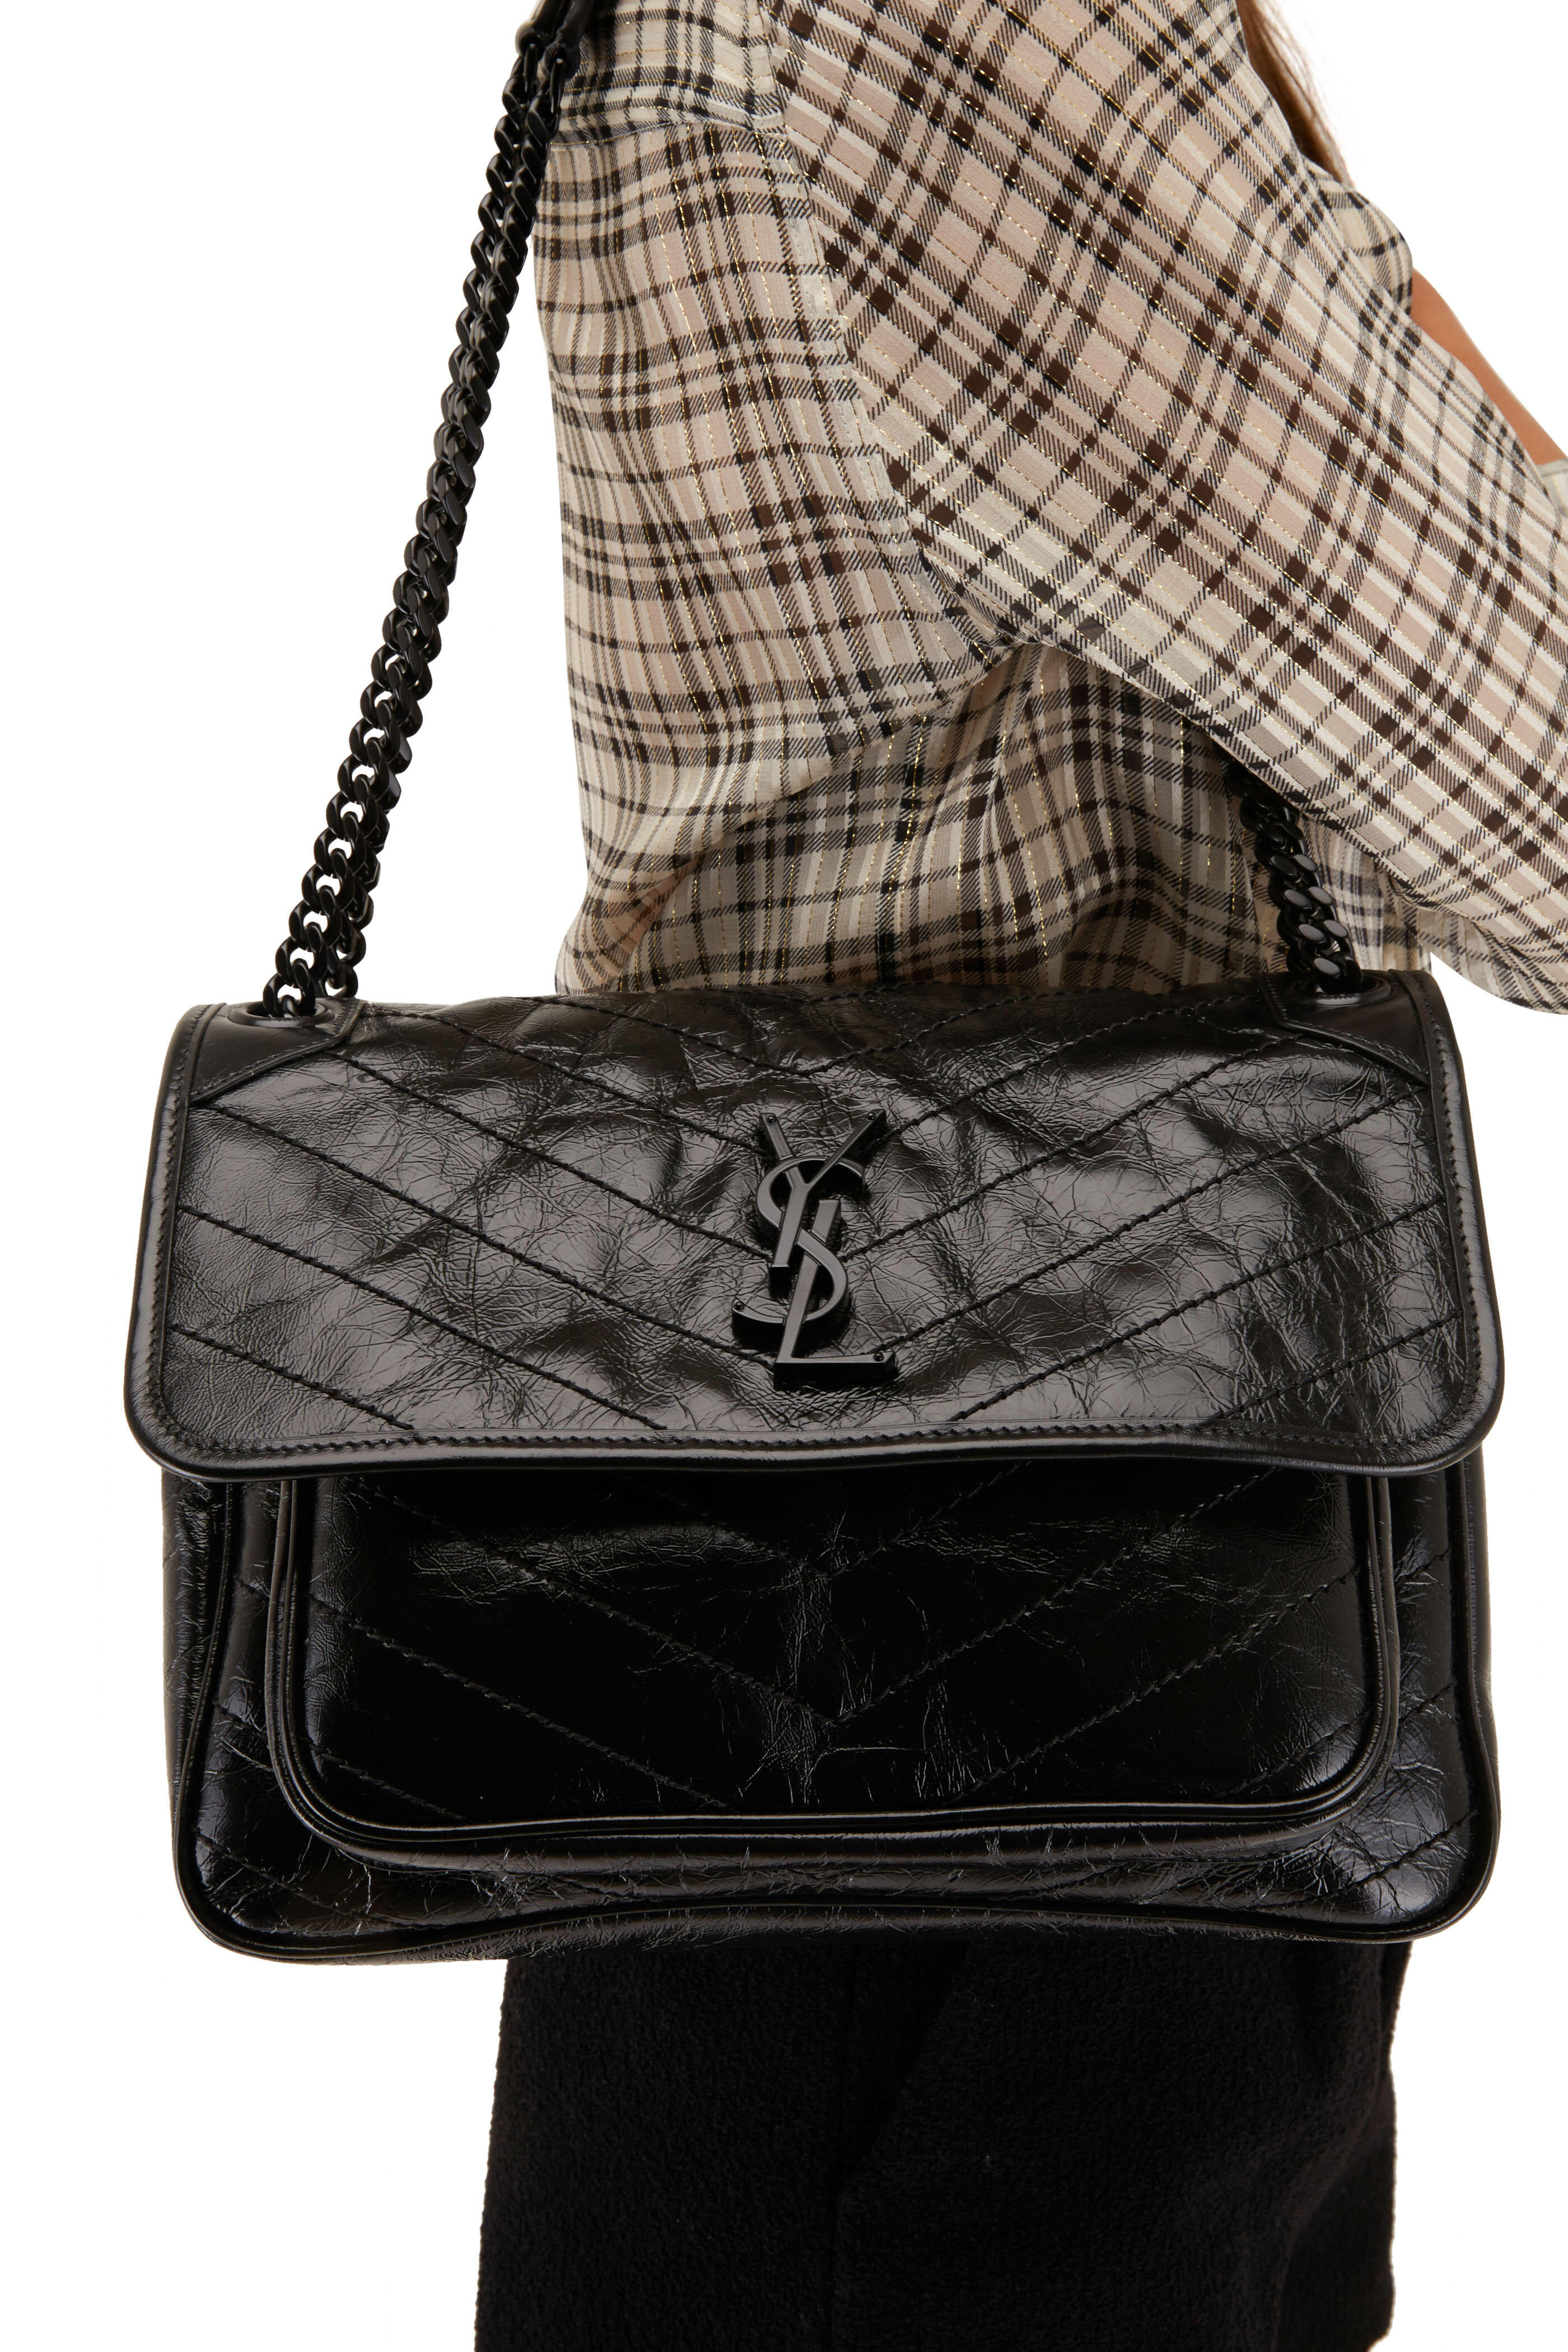 YSL - Saint Laurent Purse -LOULOU MEDIUM CHAIN BAG IN QUILTED Y LEATHER